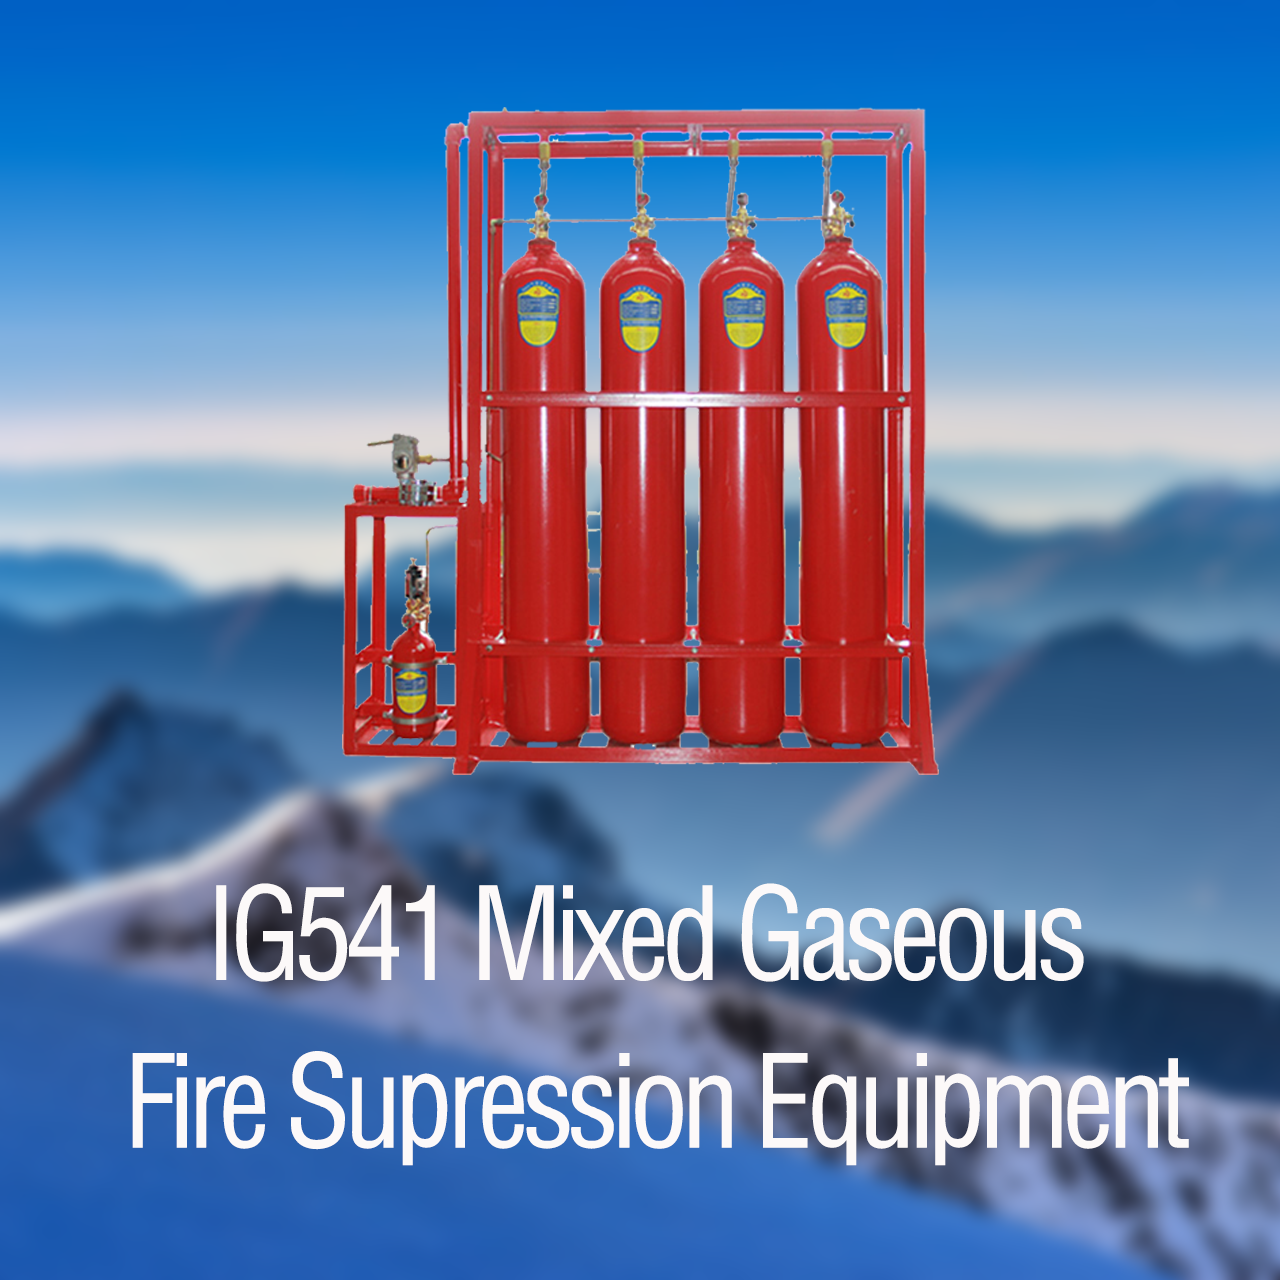 IG541 Mixed Gaseous Fire Supression Equipment